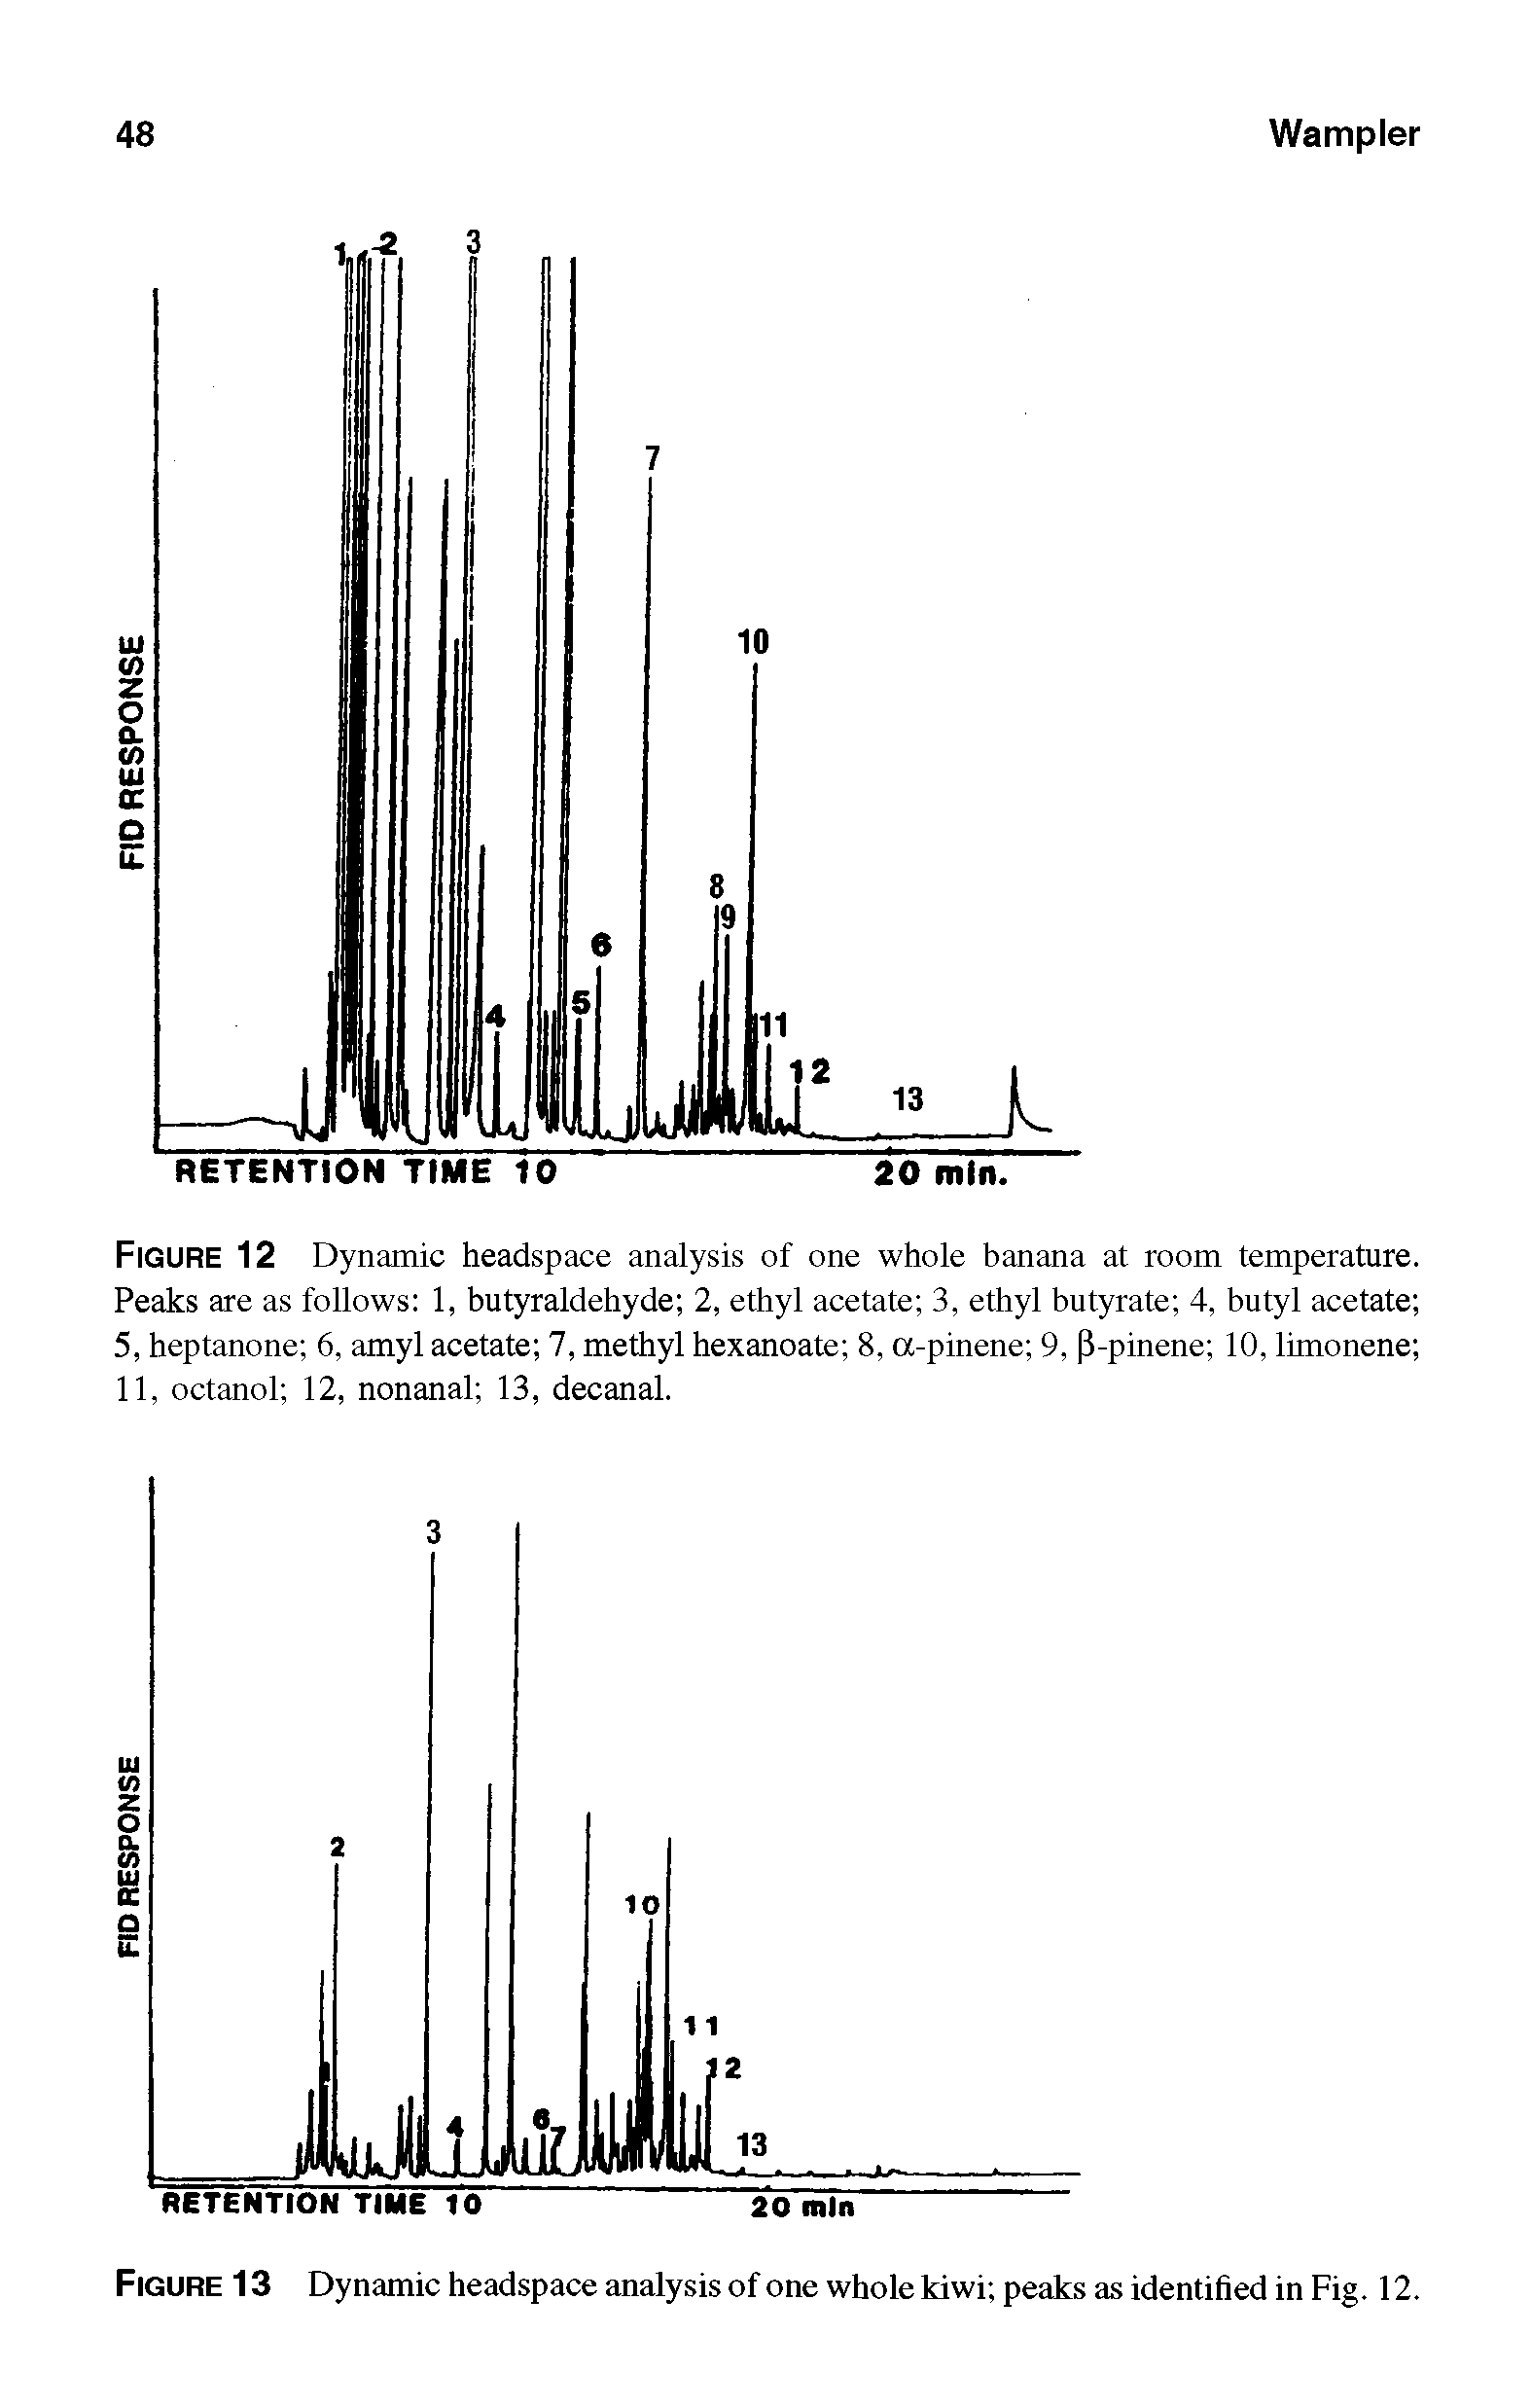 Figure 12 Dynamic headspace analysis of one whole banana at room temperature. Peaks are as follows 1, butyraldehyde 2, ethyl acetate 3, ethyl butyrate 4, butyl acetate 5, heptanone 6, amyl acetate 7, methyl hexanoate 8, a-pinene 9, 3-pinene 10, limonene 11, octanol 12, nonanal 13, decanal.